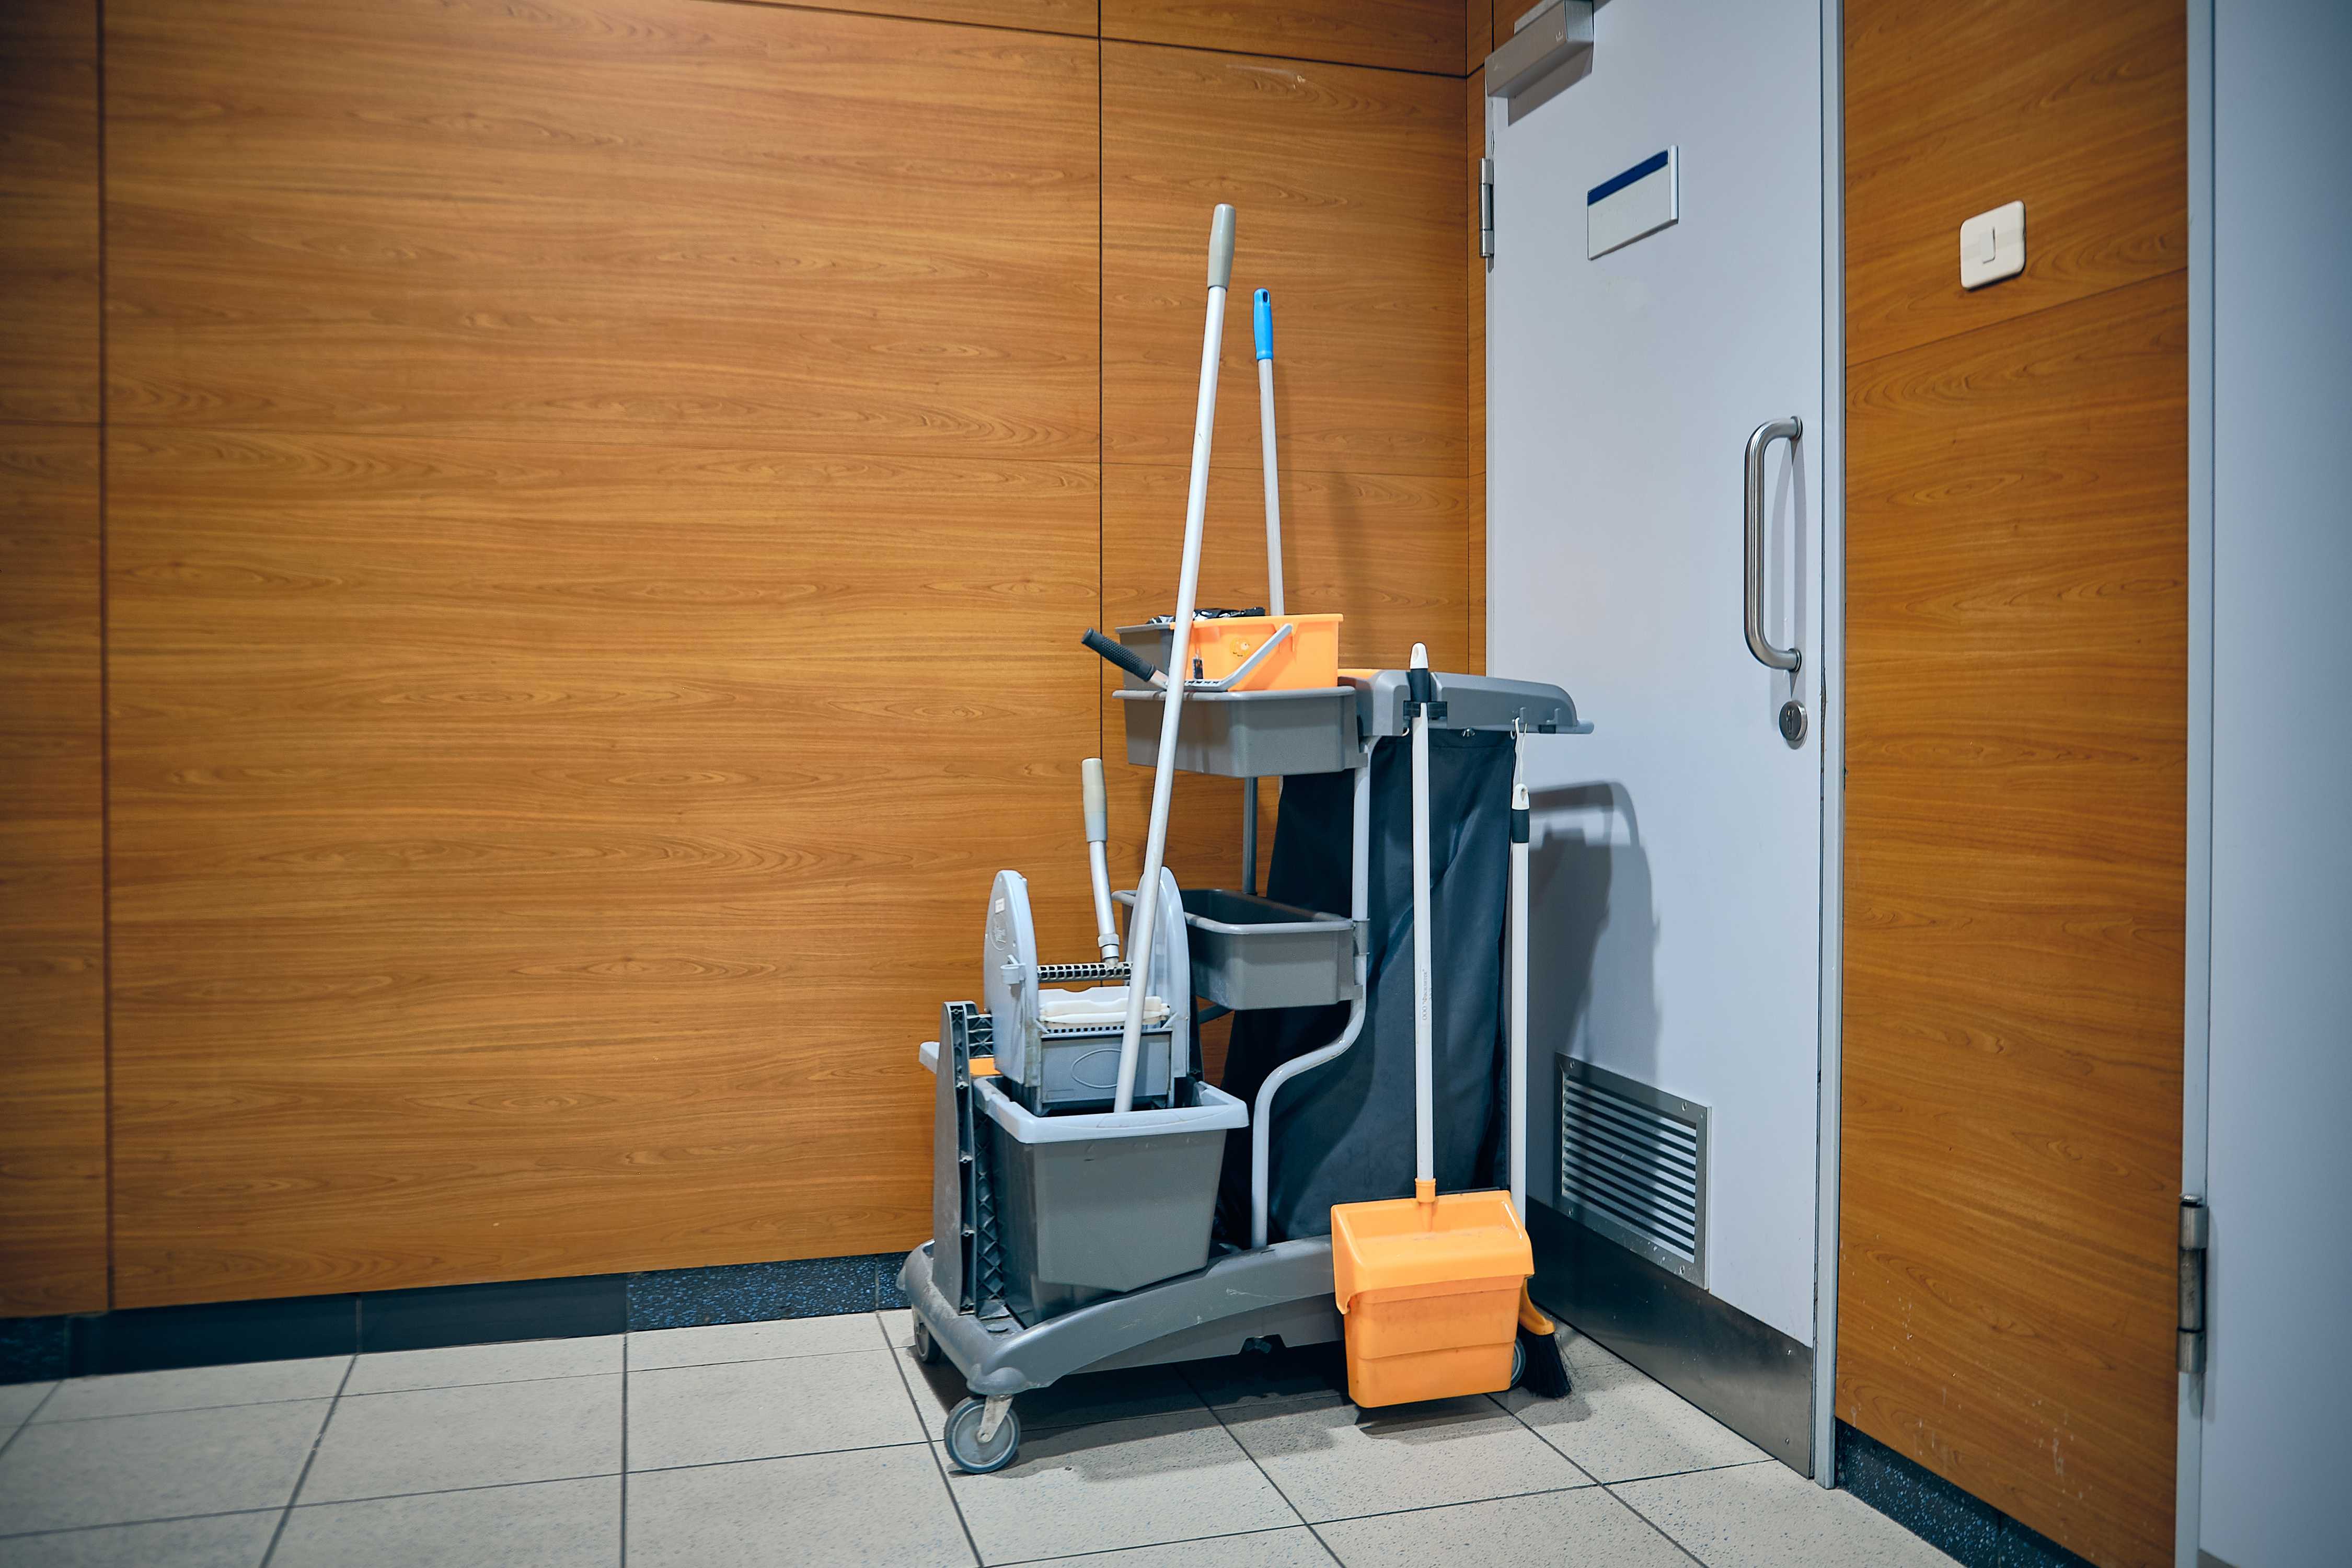 Cleaning tools on a cart next to a door inside a facility